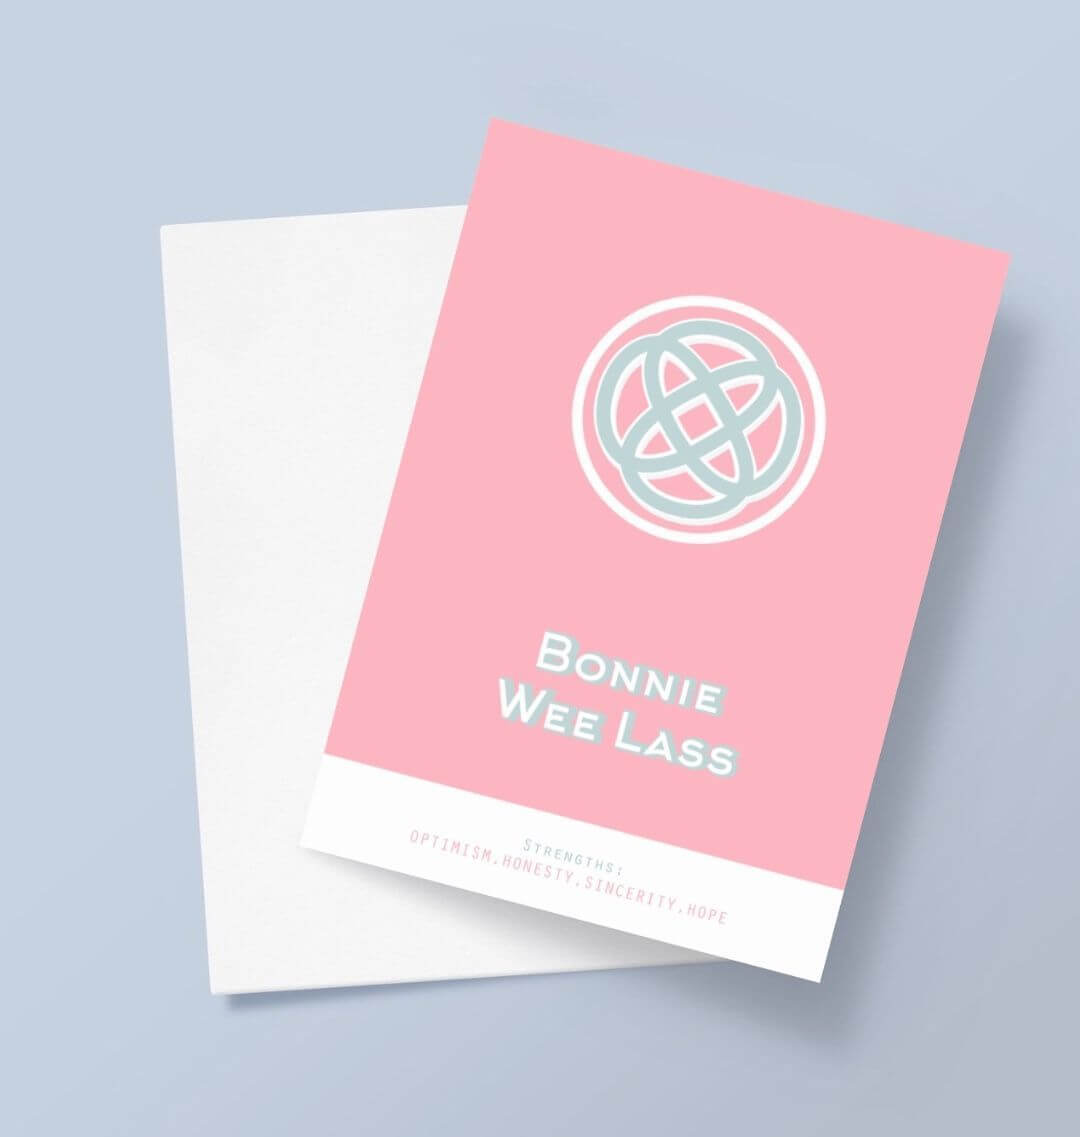 Bonnie Wee Lass Greetings Card Archetype Accessories